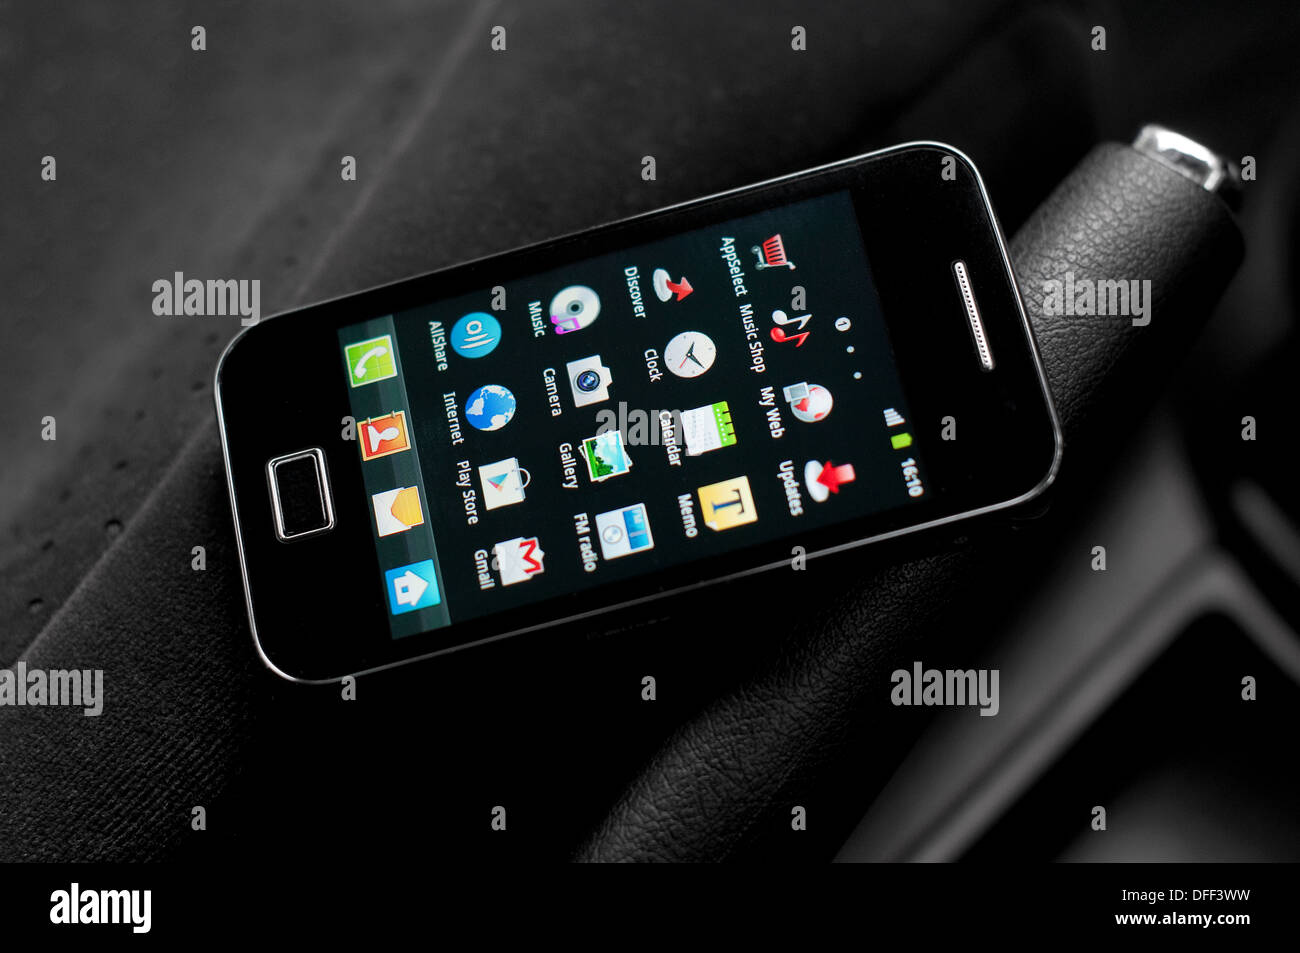 android smartphone laying on car seat Stock Photo